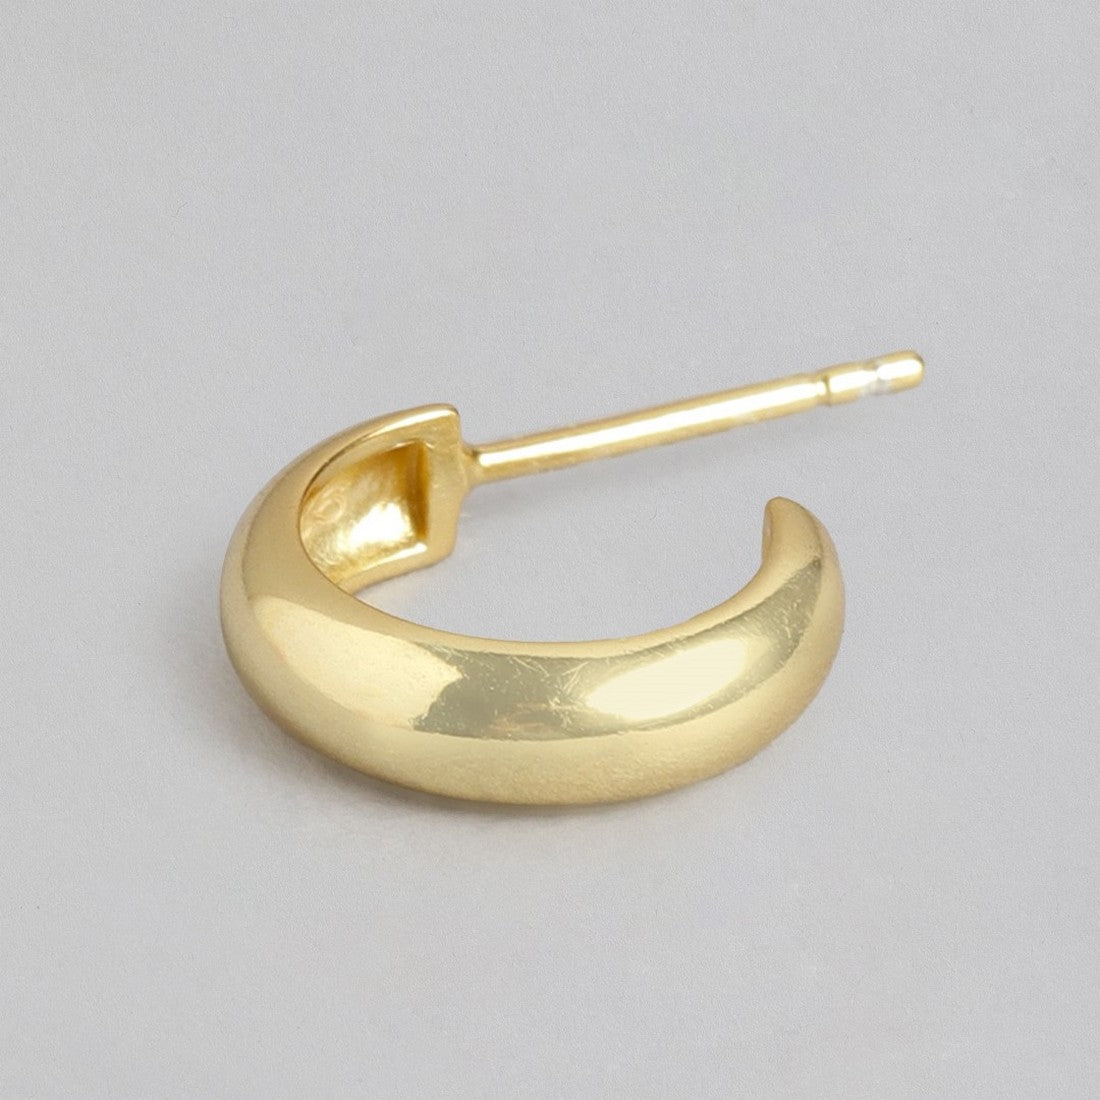 Circular Gold Plated 925 Sterling Silver Half Hoops Earring